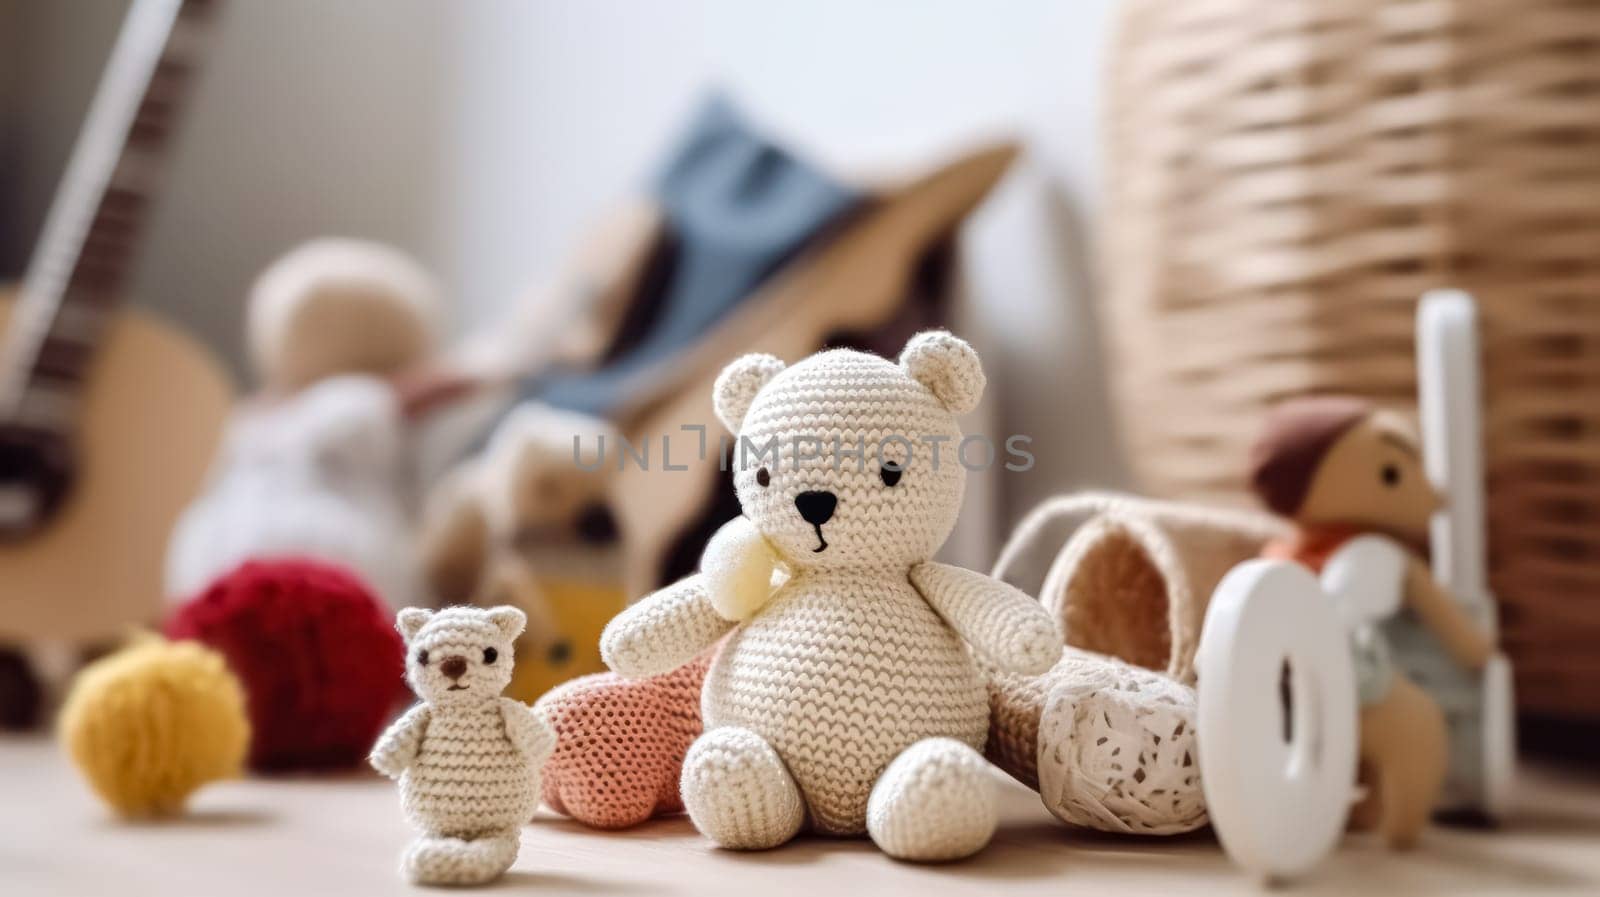 Adorable homemade multicolored knitted toys shaped like various animals, perfect for adding a touch of whimsy and comfort to any child's playtime.